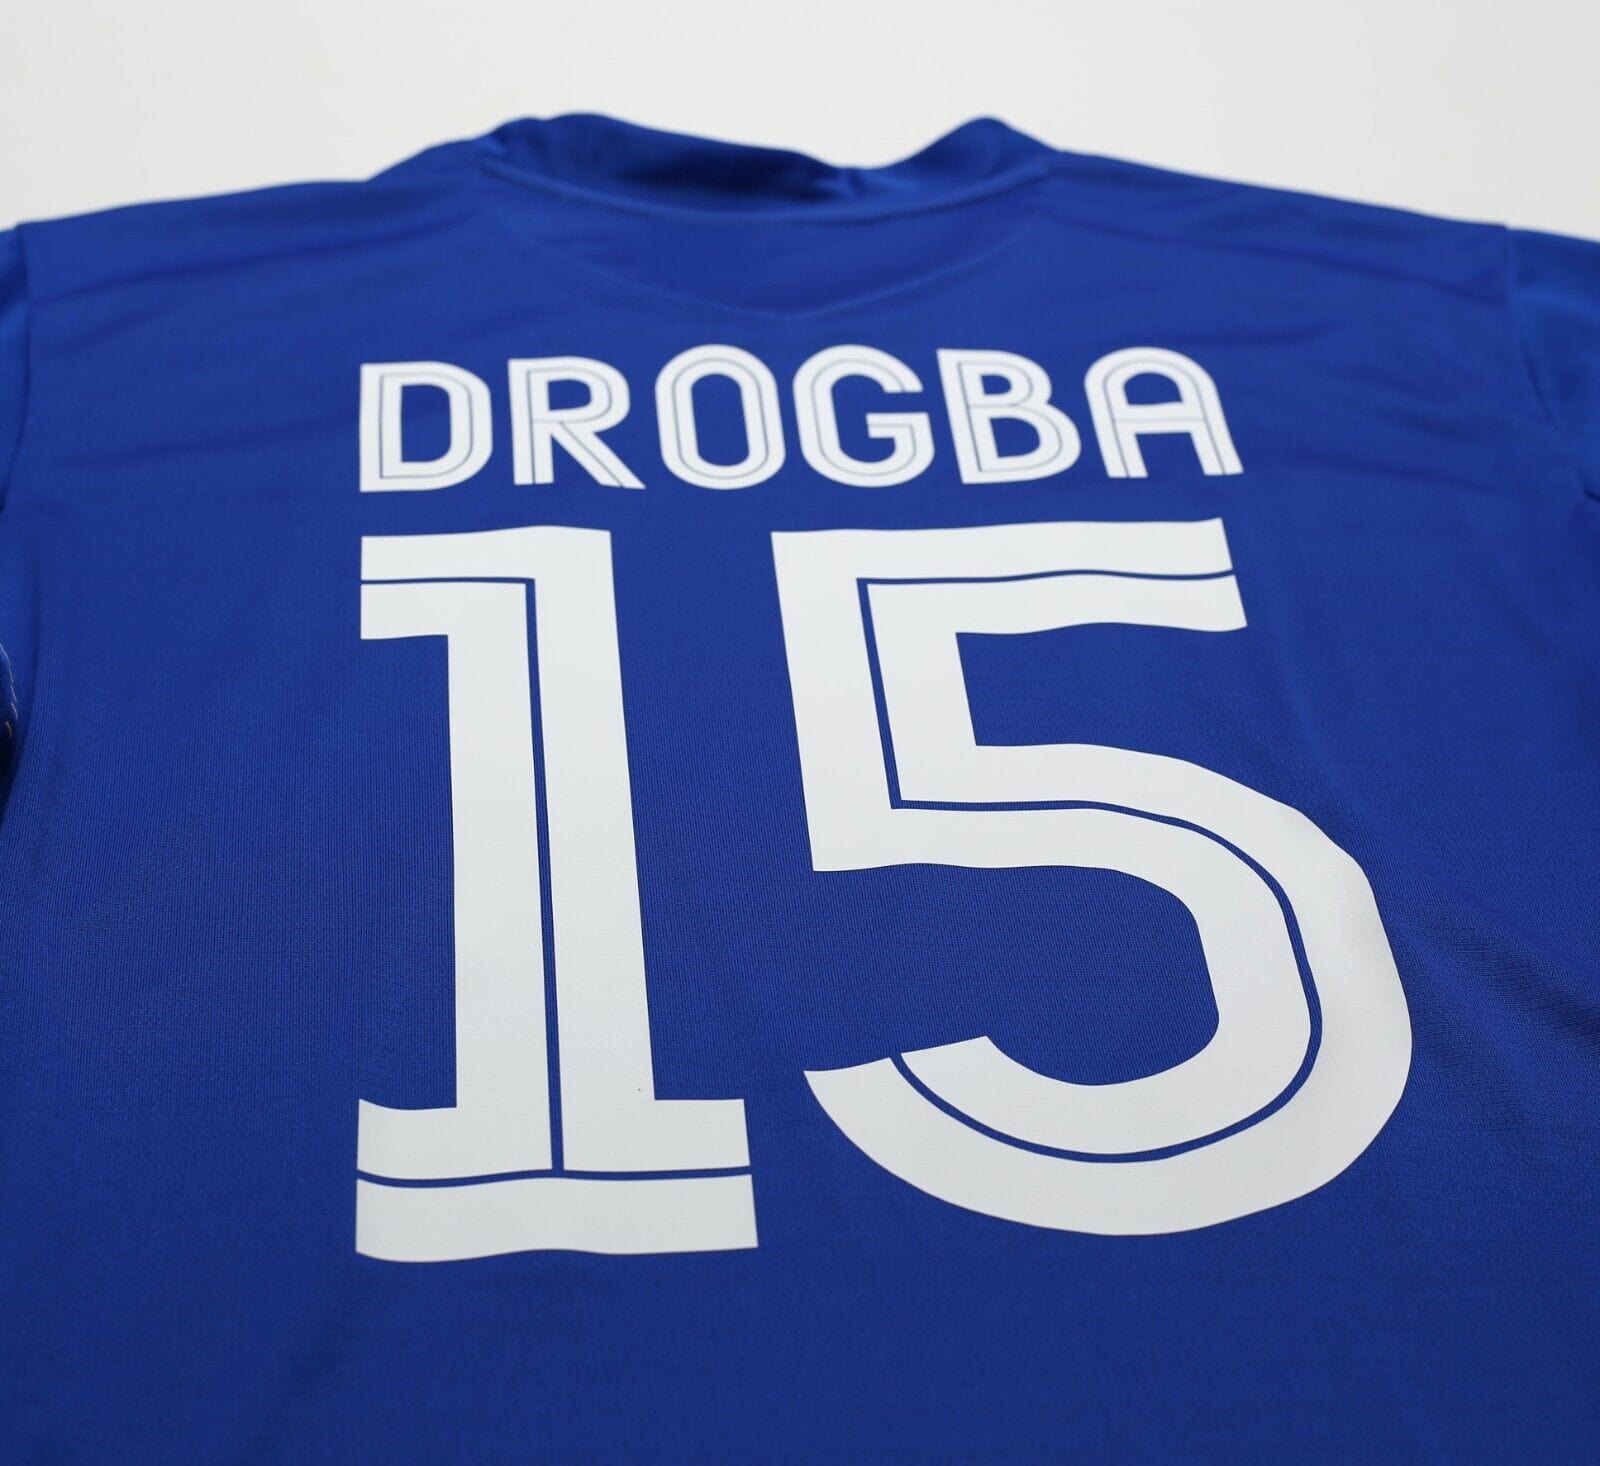 2005/06 DROGBA #15 Chelsea Vintage Umbro UCL Home Football Shirt Jersey (L)